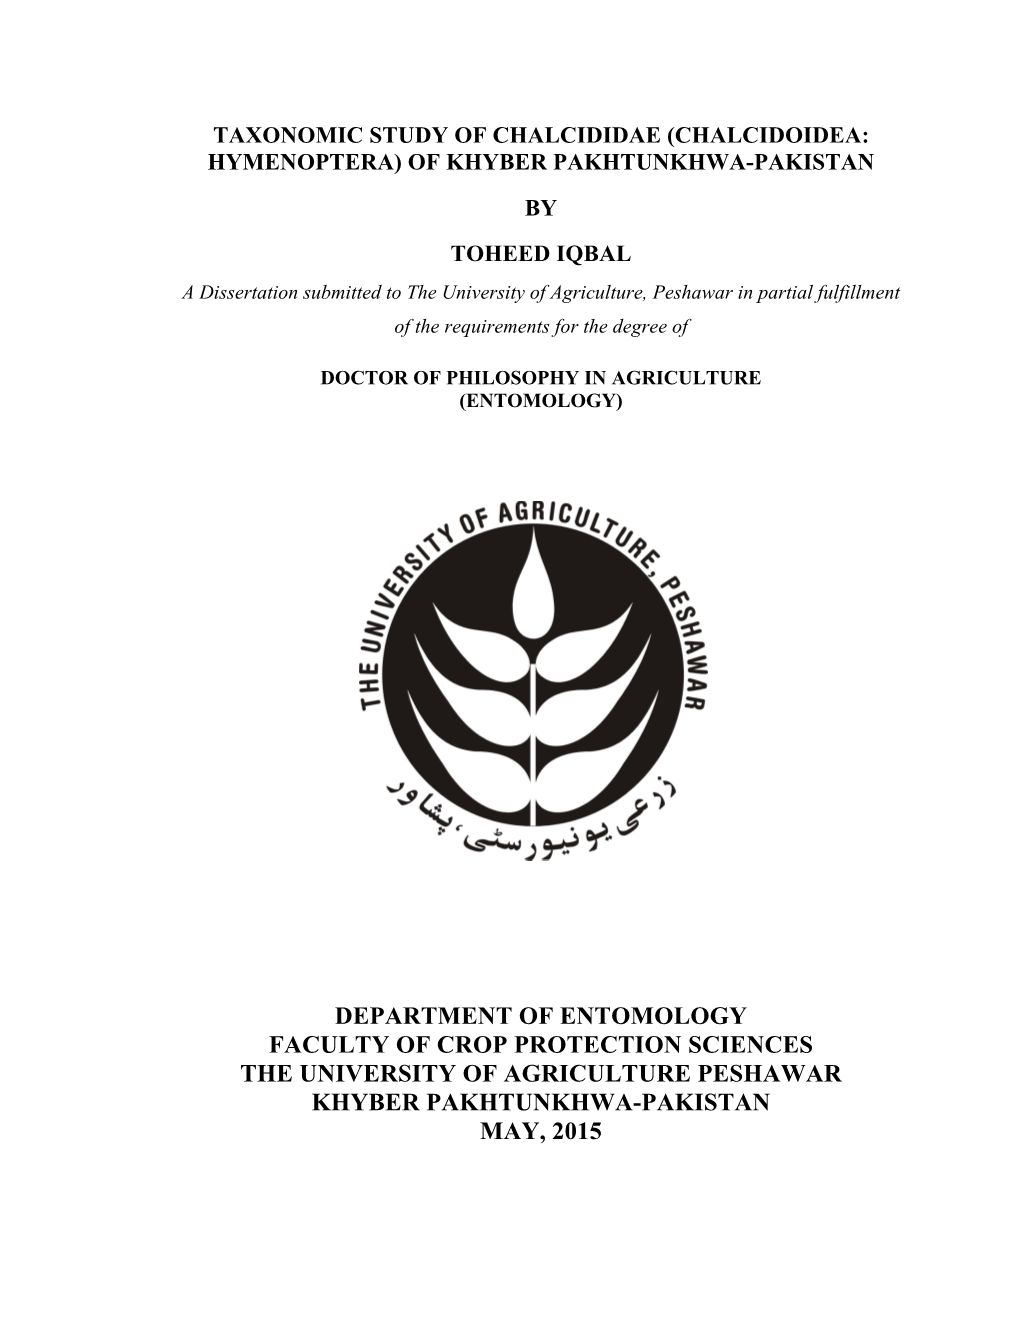 Department of Entomology Faculty of Crop Protection Sciences the University of Agriculture Peshawar Khyber Pakhtunkhwa-Pakistan May, 2015